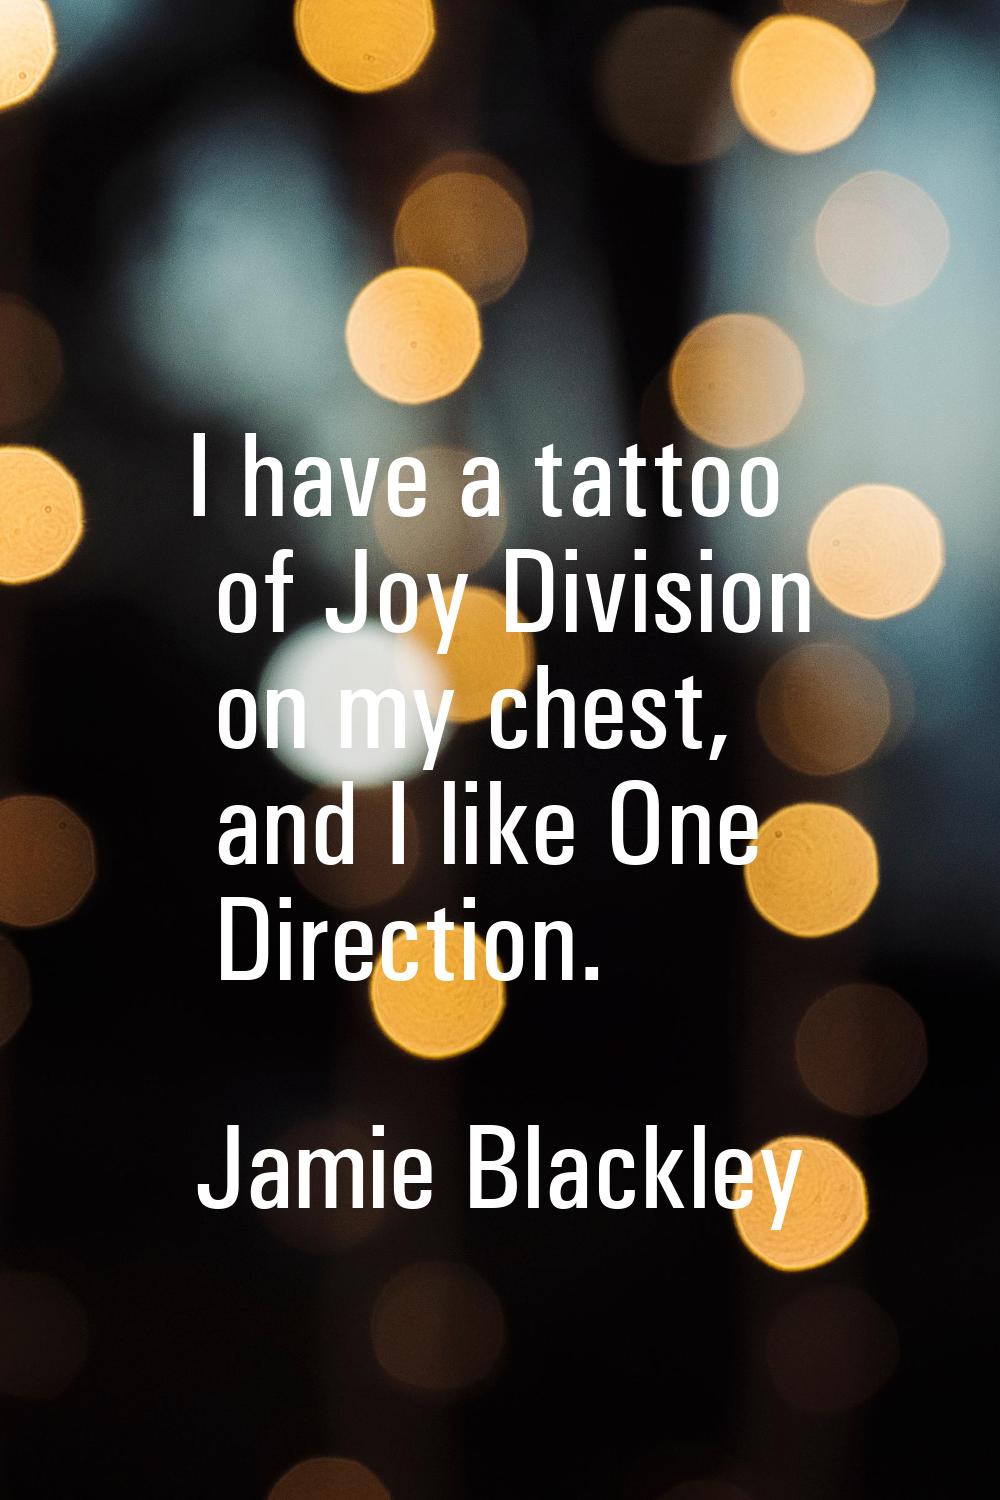 I have a tattoo of Joy Division on my chest, and I like One Direction.